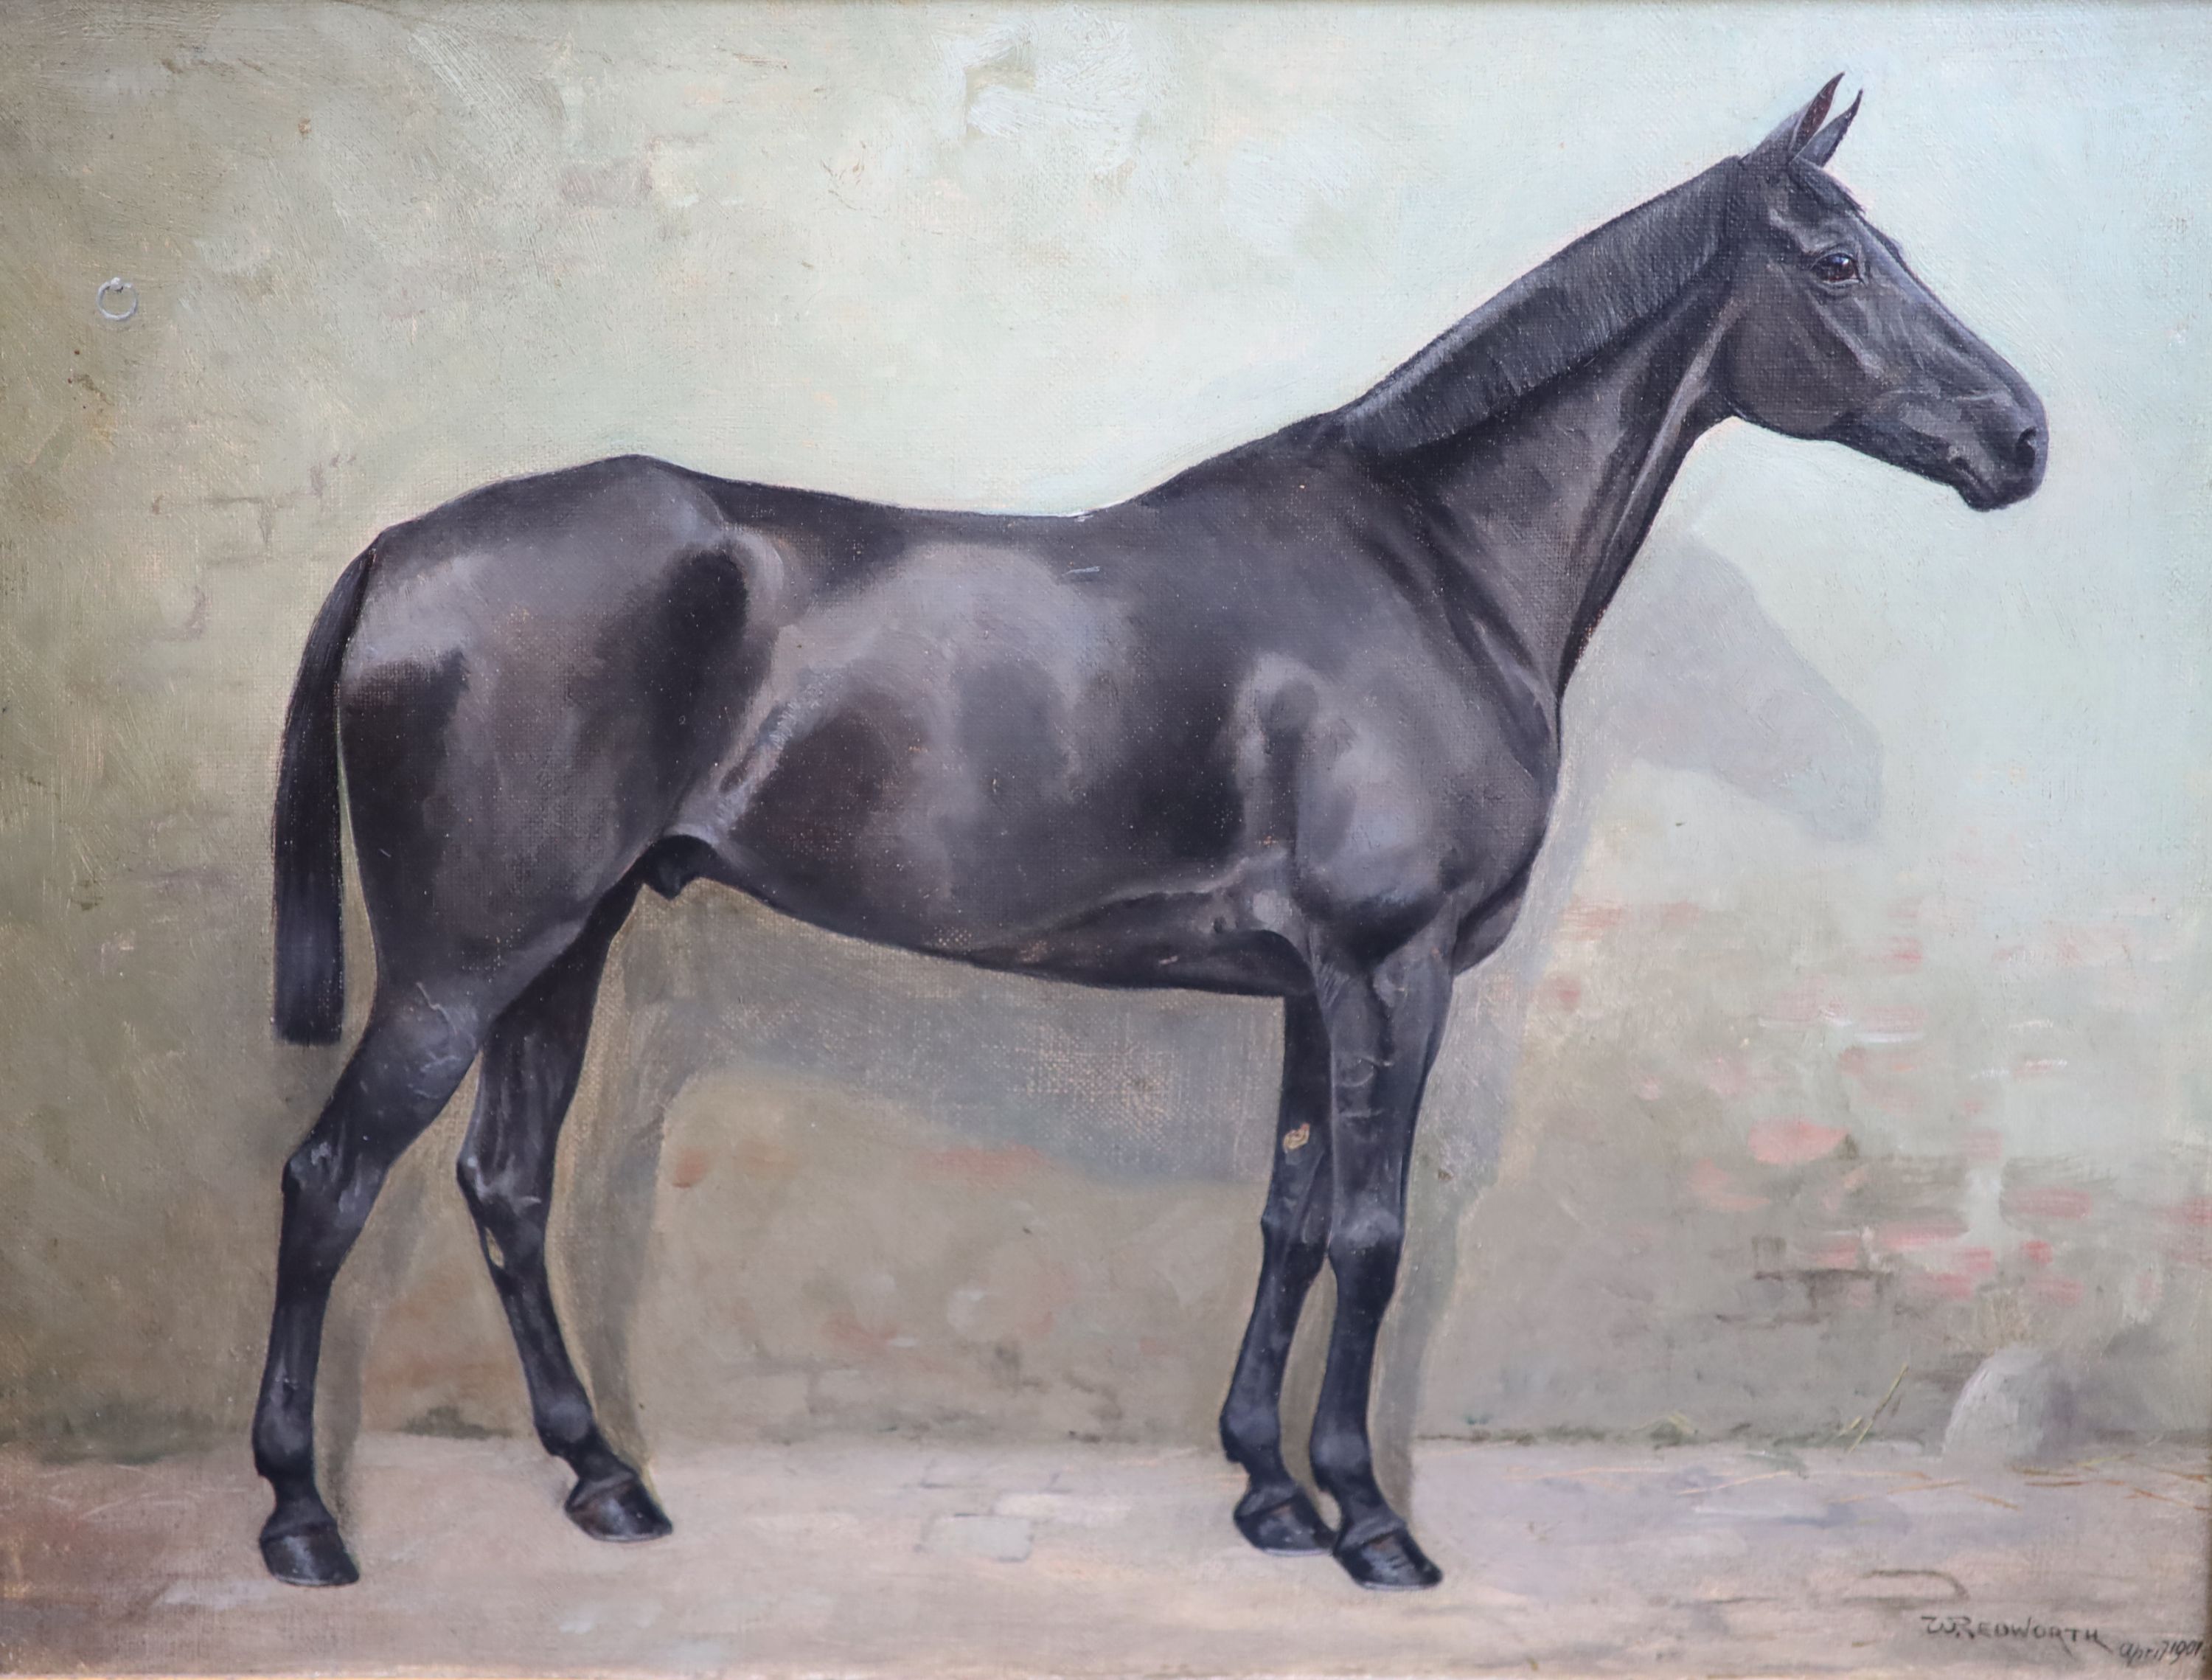 William Joseph Redworth (1873-1941), Portraits of Racehorses: Archdeacon, Chanois, Lord Dalmahoy and Niger, set of 4 oils on canvas, 30 x 39.5cm